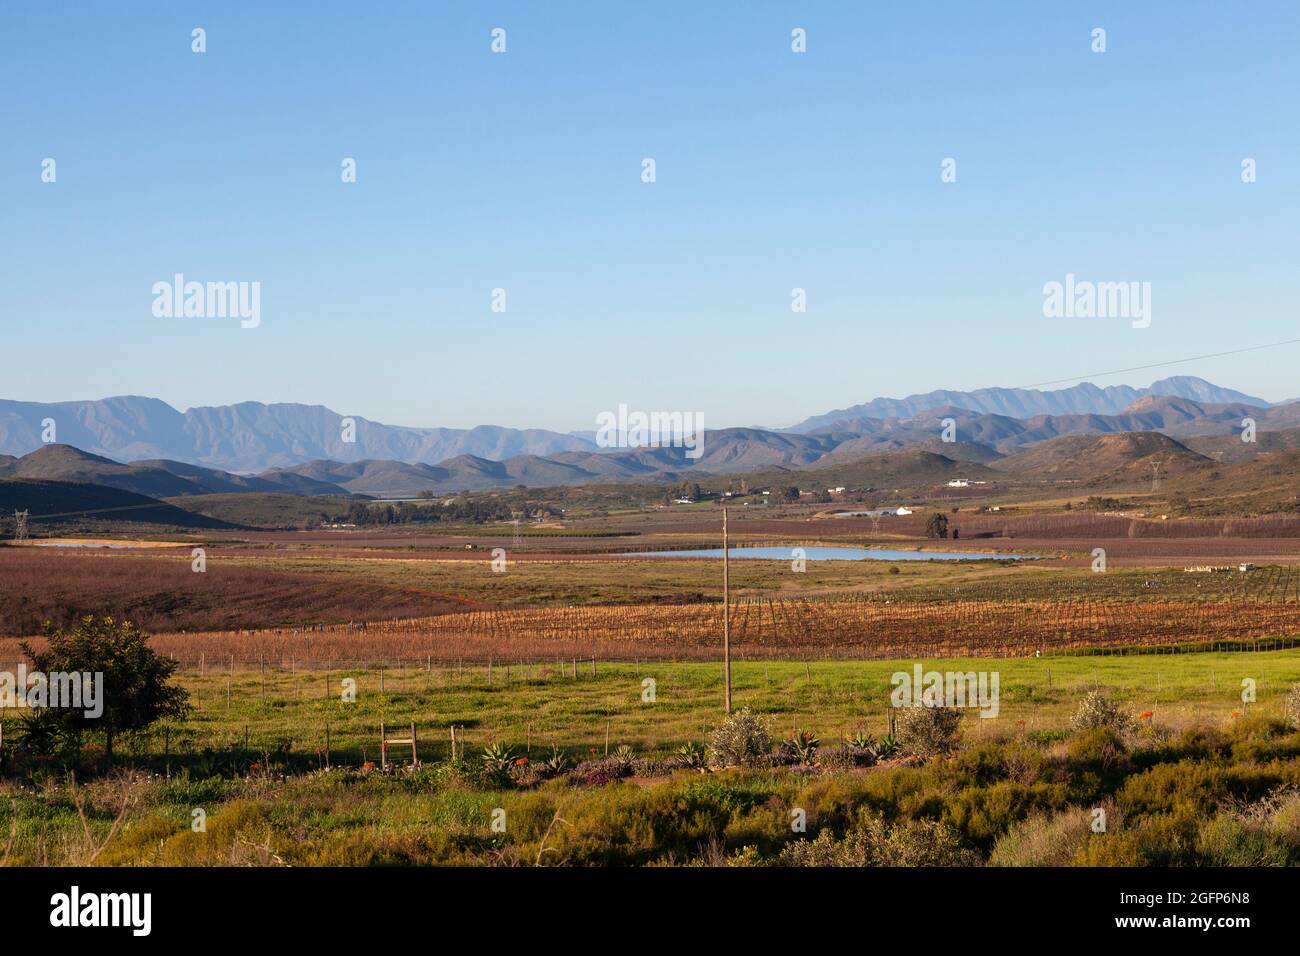 Sunset view over vineyards in the Robertson Wine Valley near McGregor with a view to the Langeberg Mountains, Western Cape Winelands, South Africa in Stock Photo